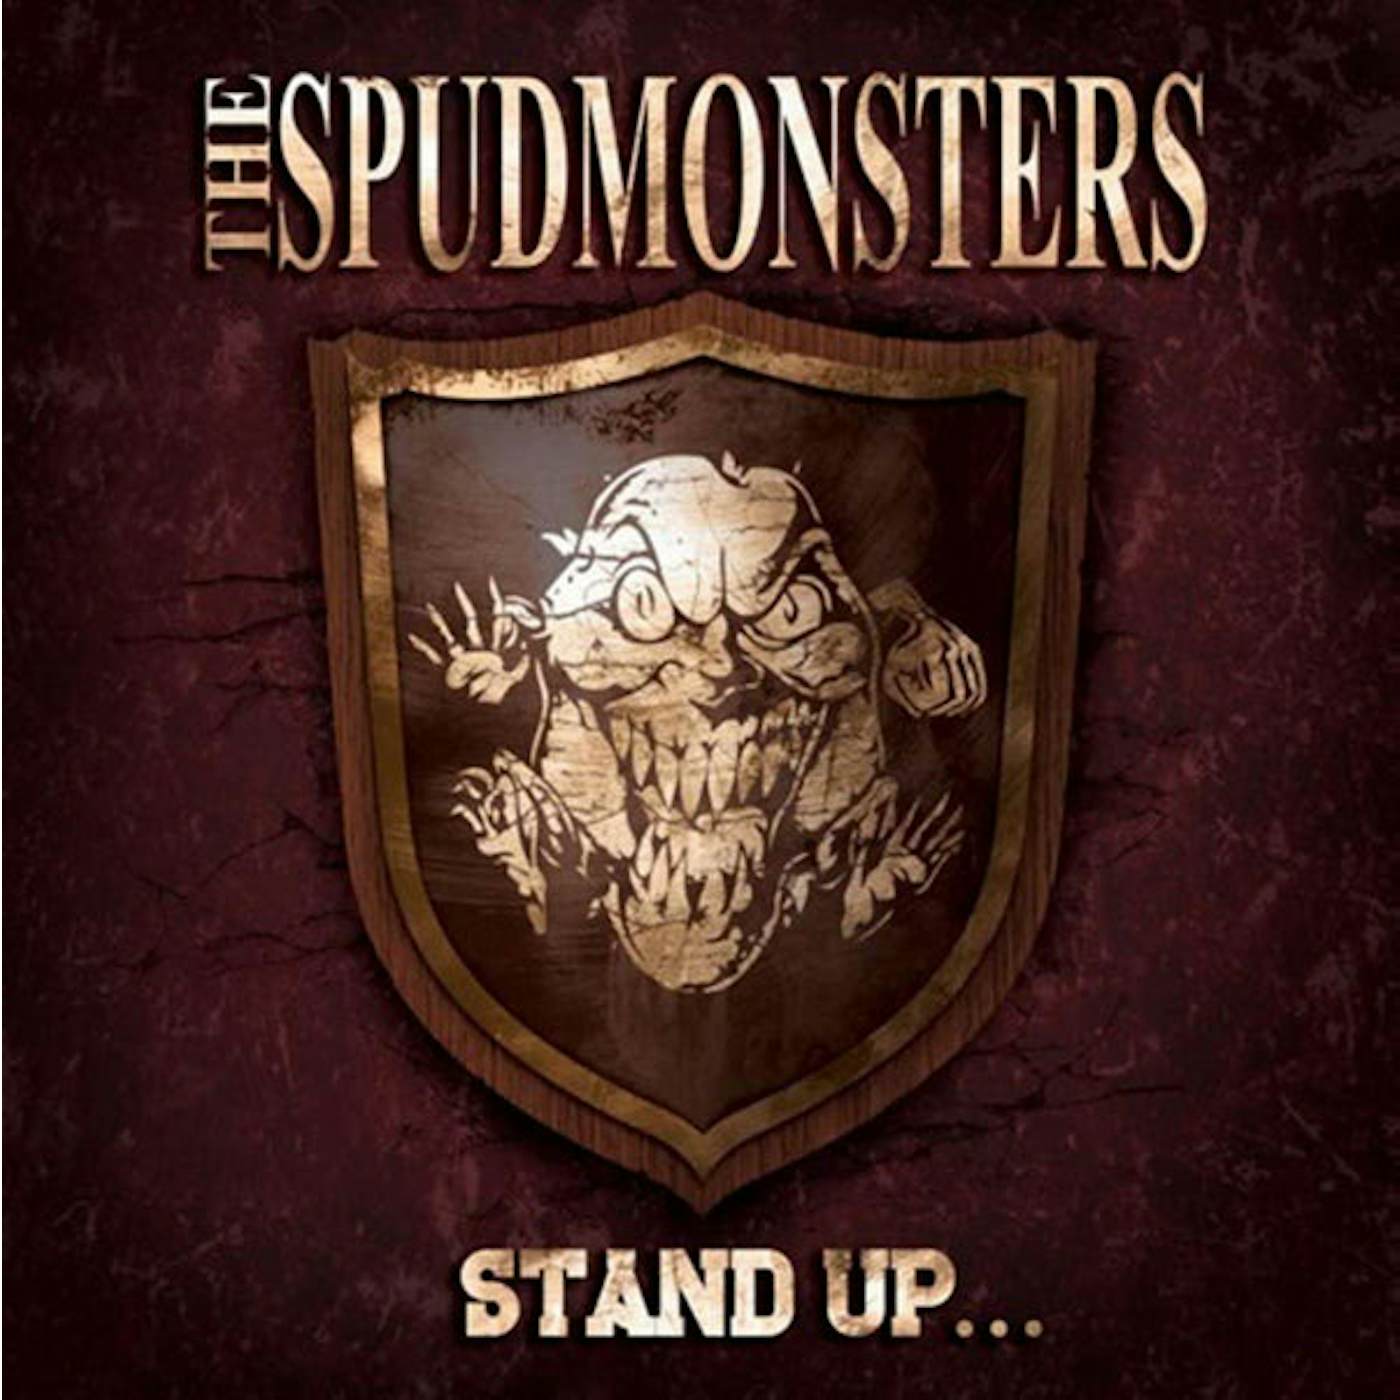 The Spudmonsters LP - Stand Up (Vinyl)